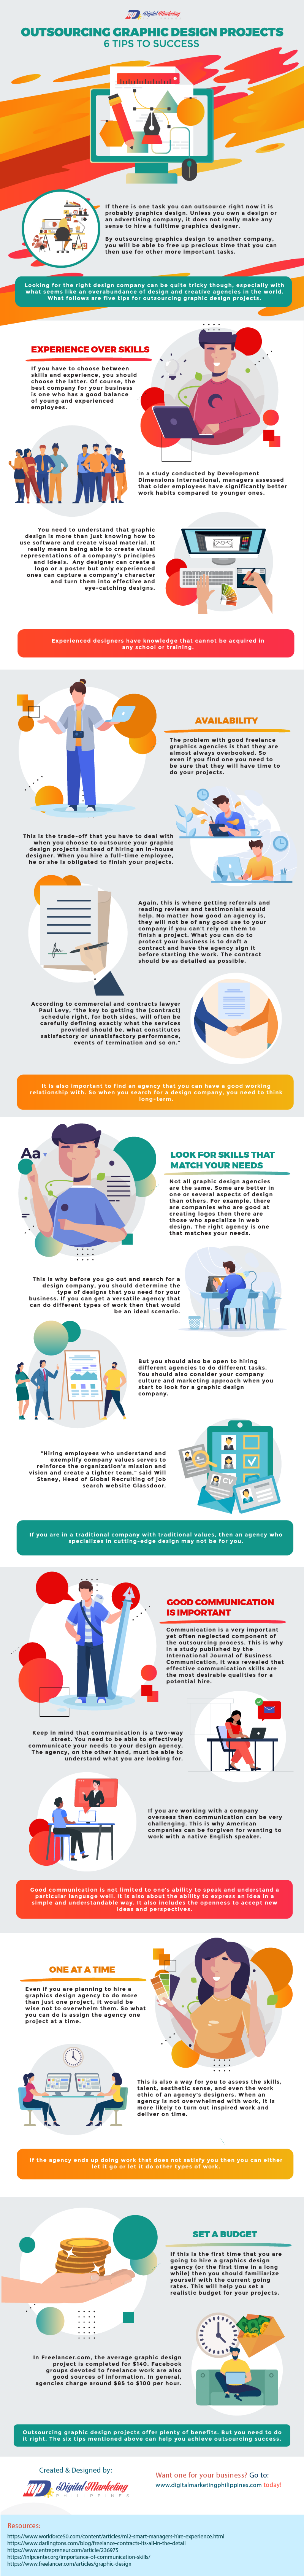 outsourcing graphic design projects – 6 tips to success [infographic] – business 2 community